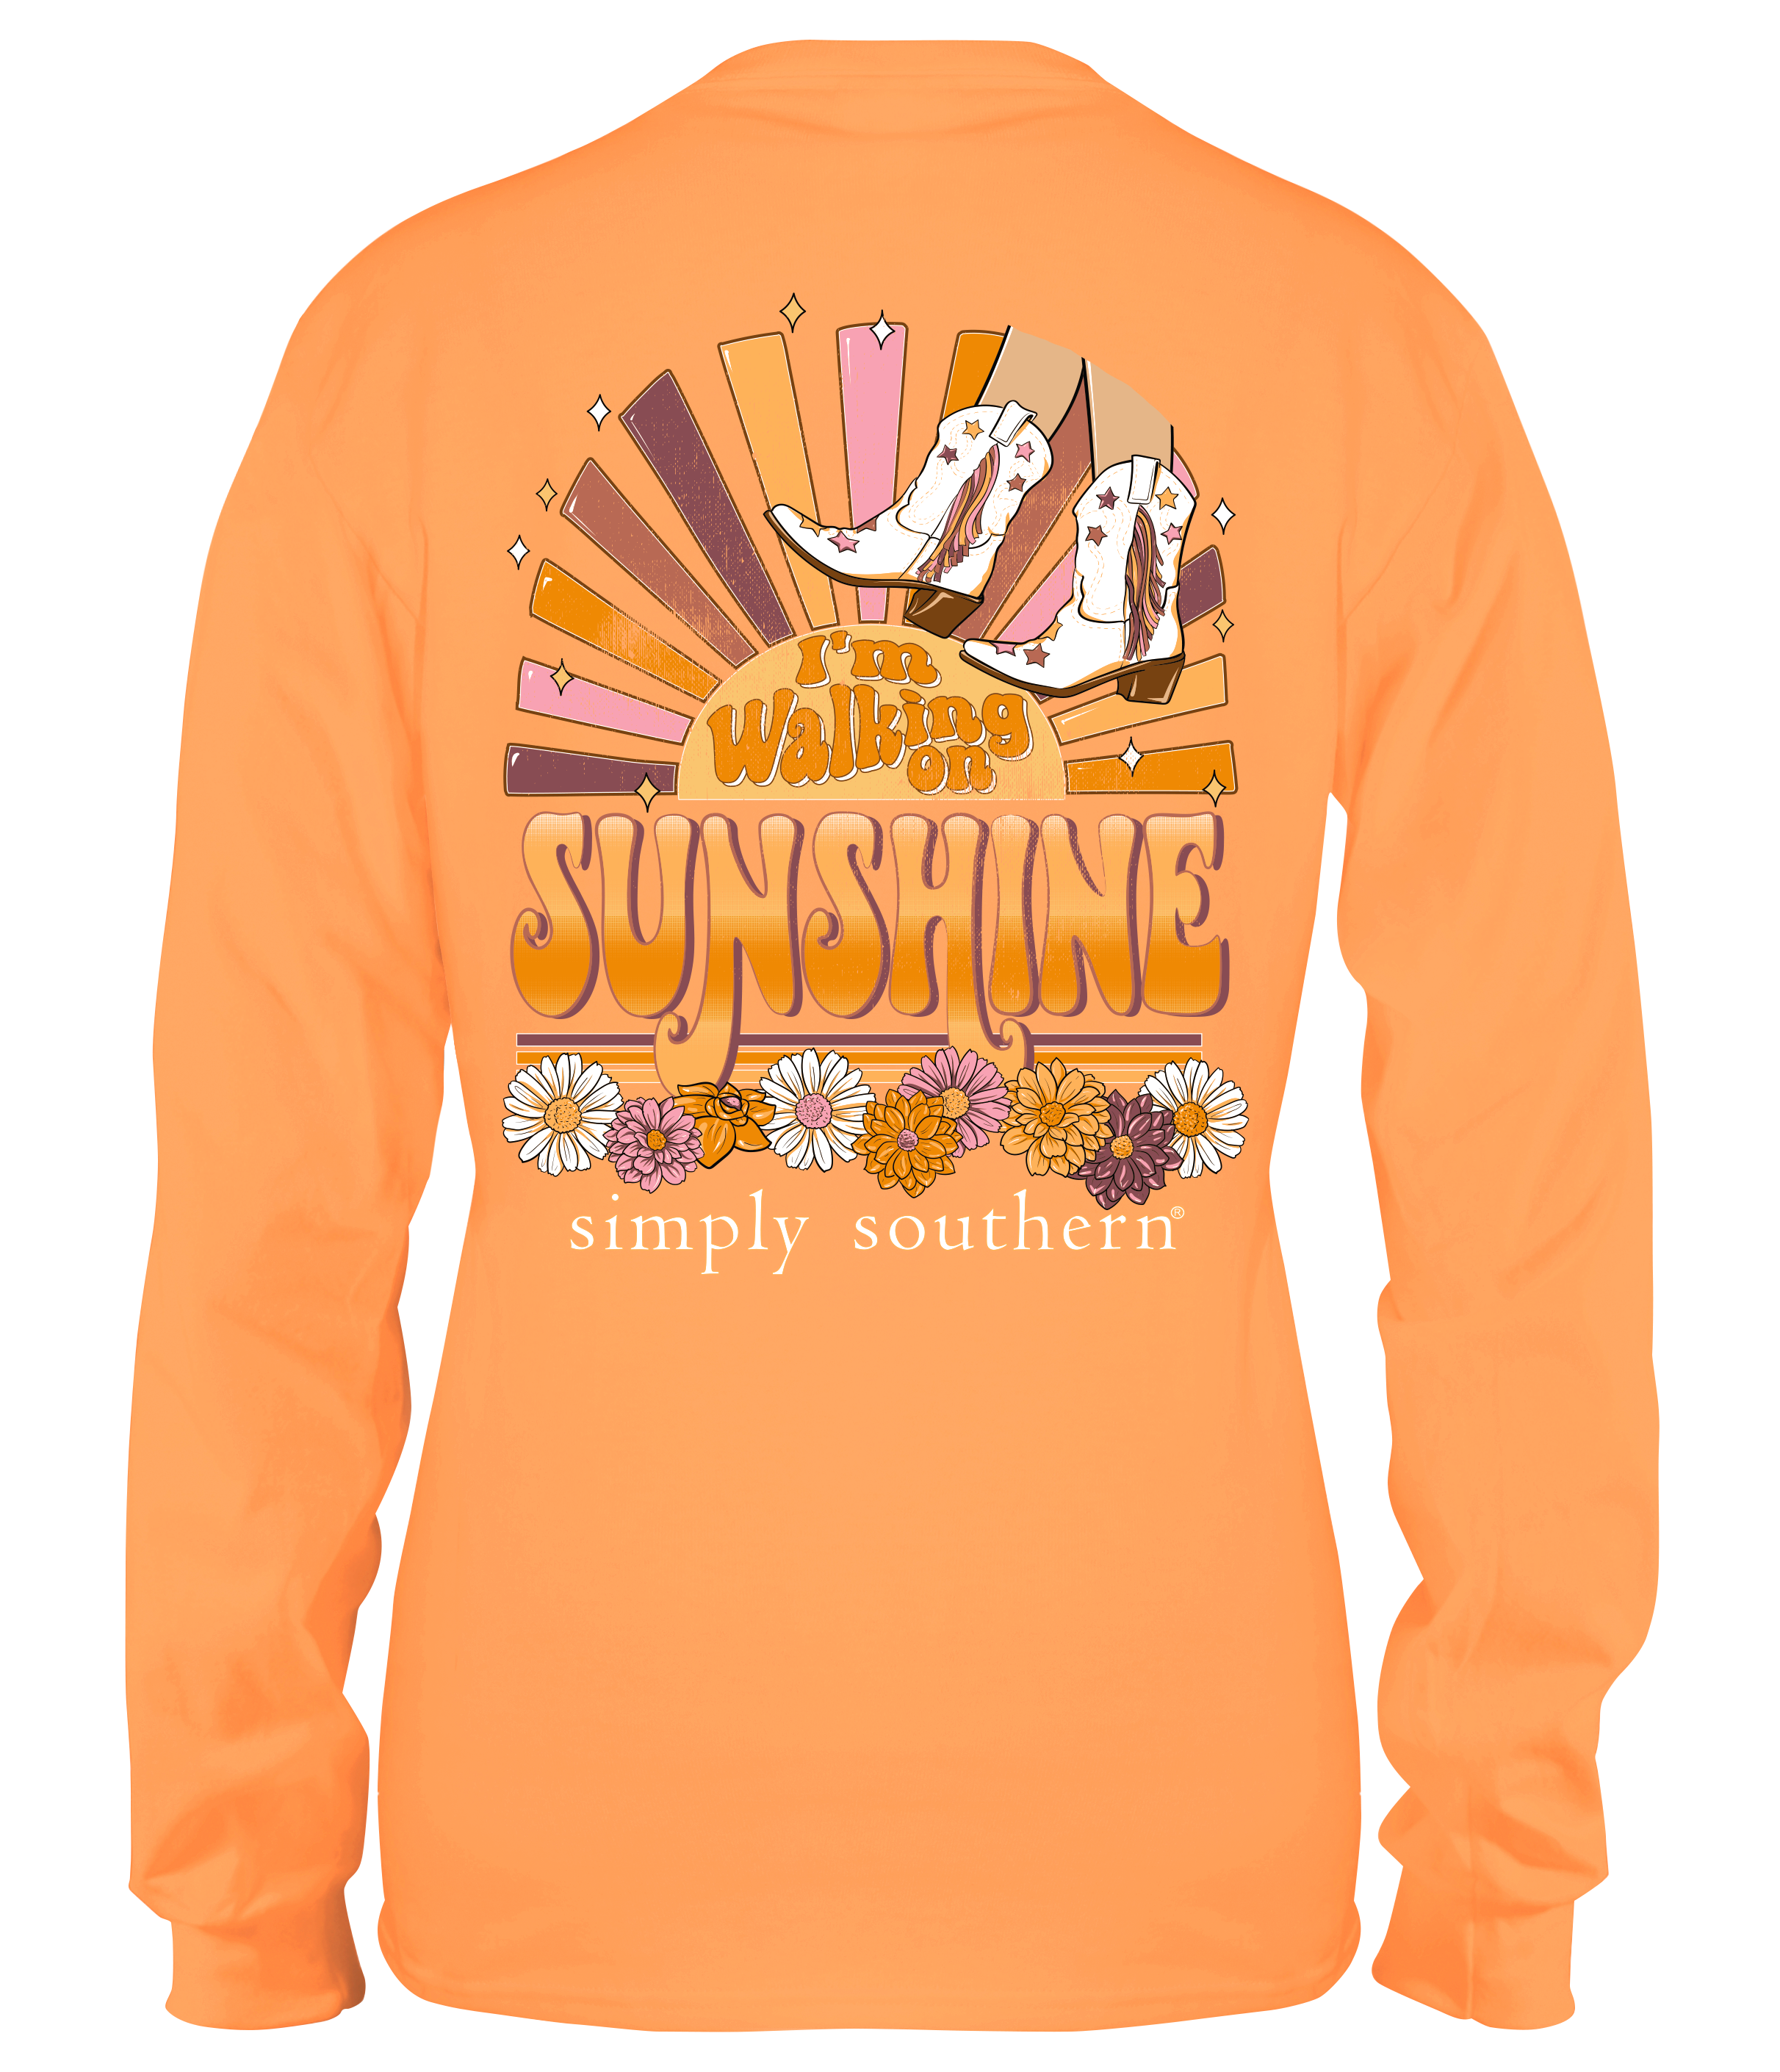 'Walking On Sunshine' Long Sleeve Tee by Simply Southern